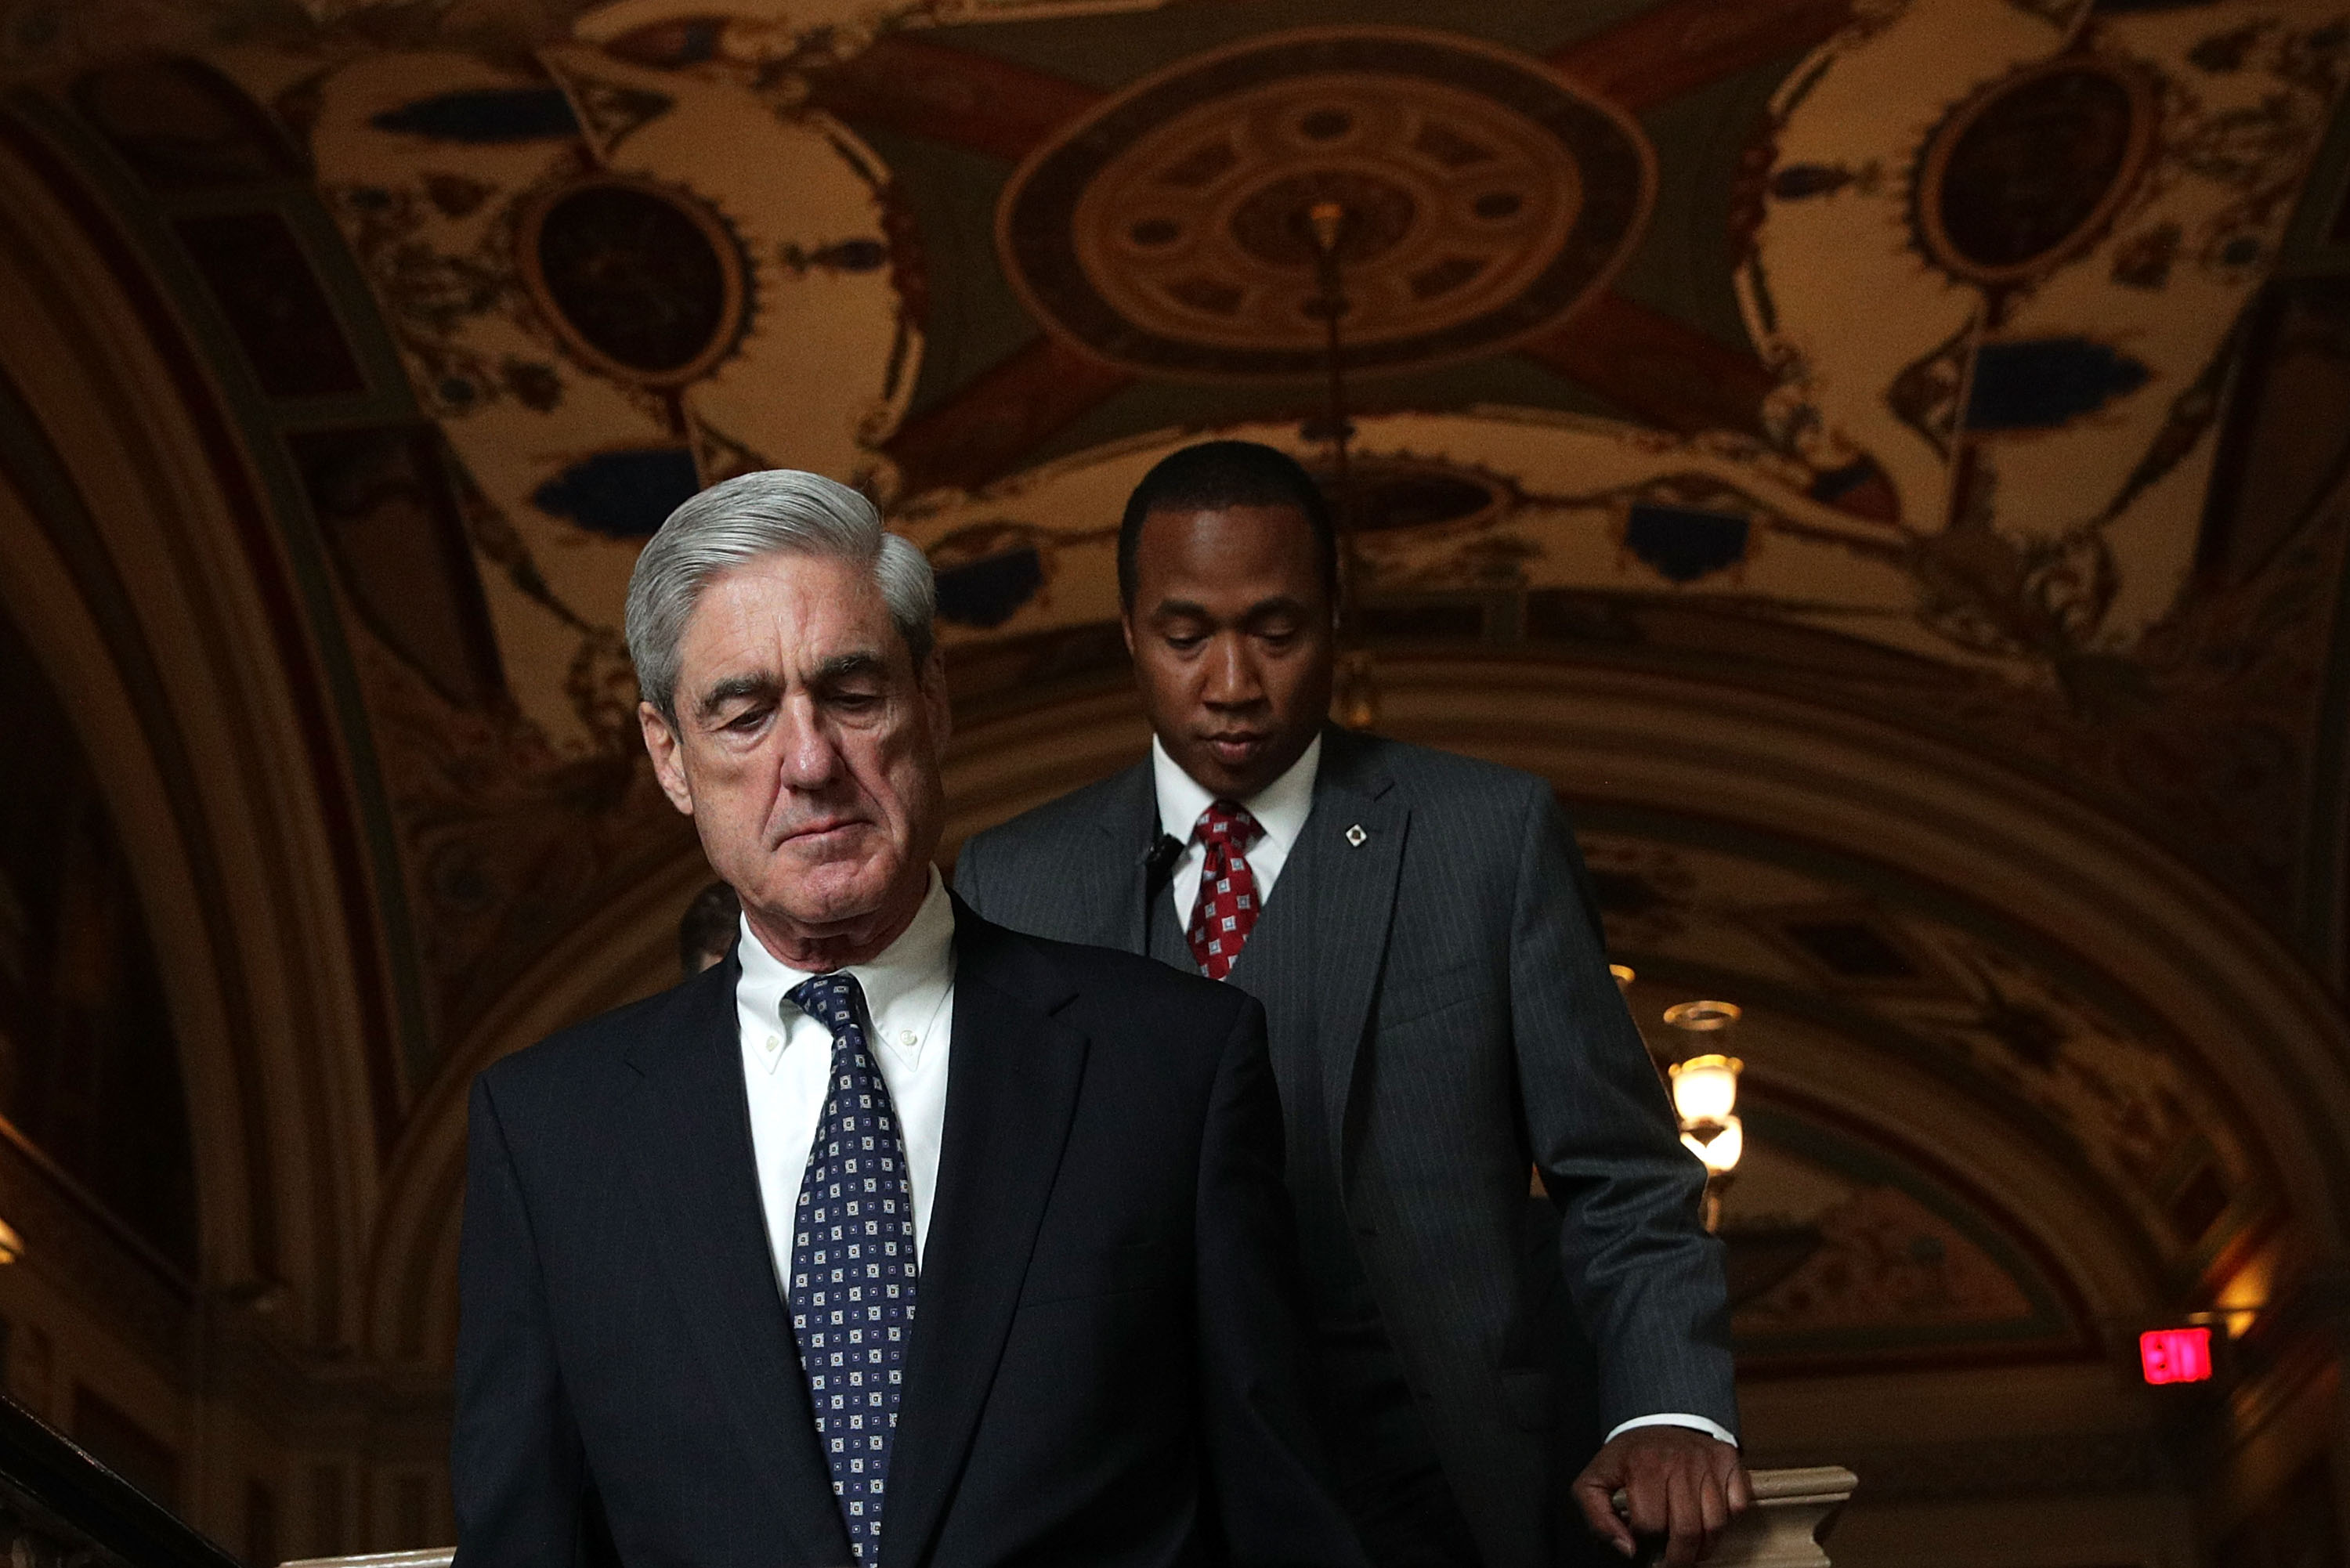 WASHINGTON, DC - JUNE 21: Special counsel Robert Mueller (L) arrives at the U.S. Capitol for closed meeting with members of the Senate Judiciary Committee June 21, 2017 in Washington, DC. The committee meets with Mueller to discuss the firing of former FBI Director James Comey. (Photo by Alex Wong/Getty Images)